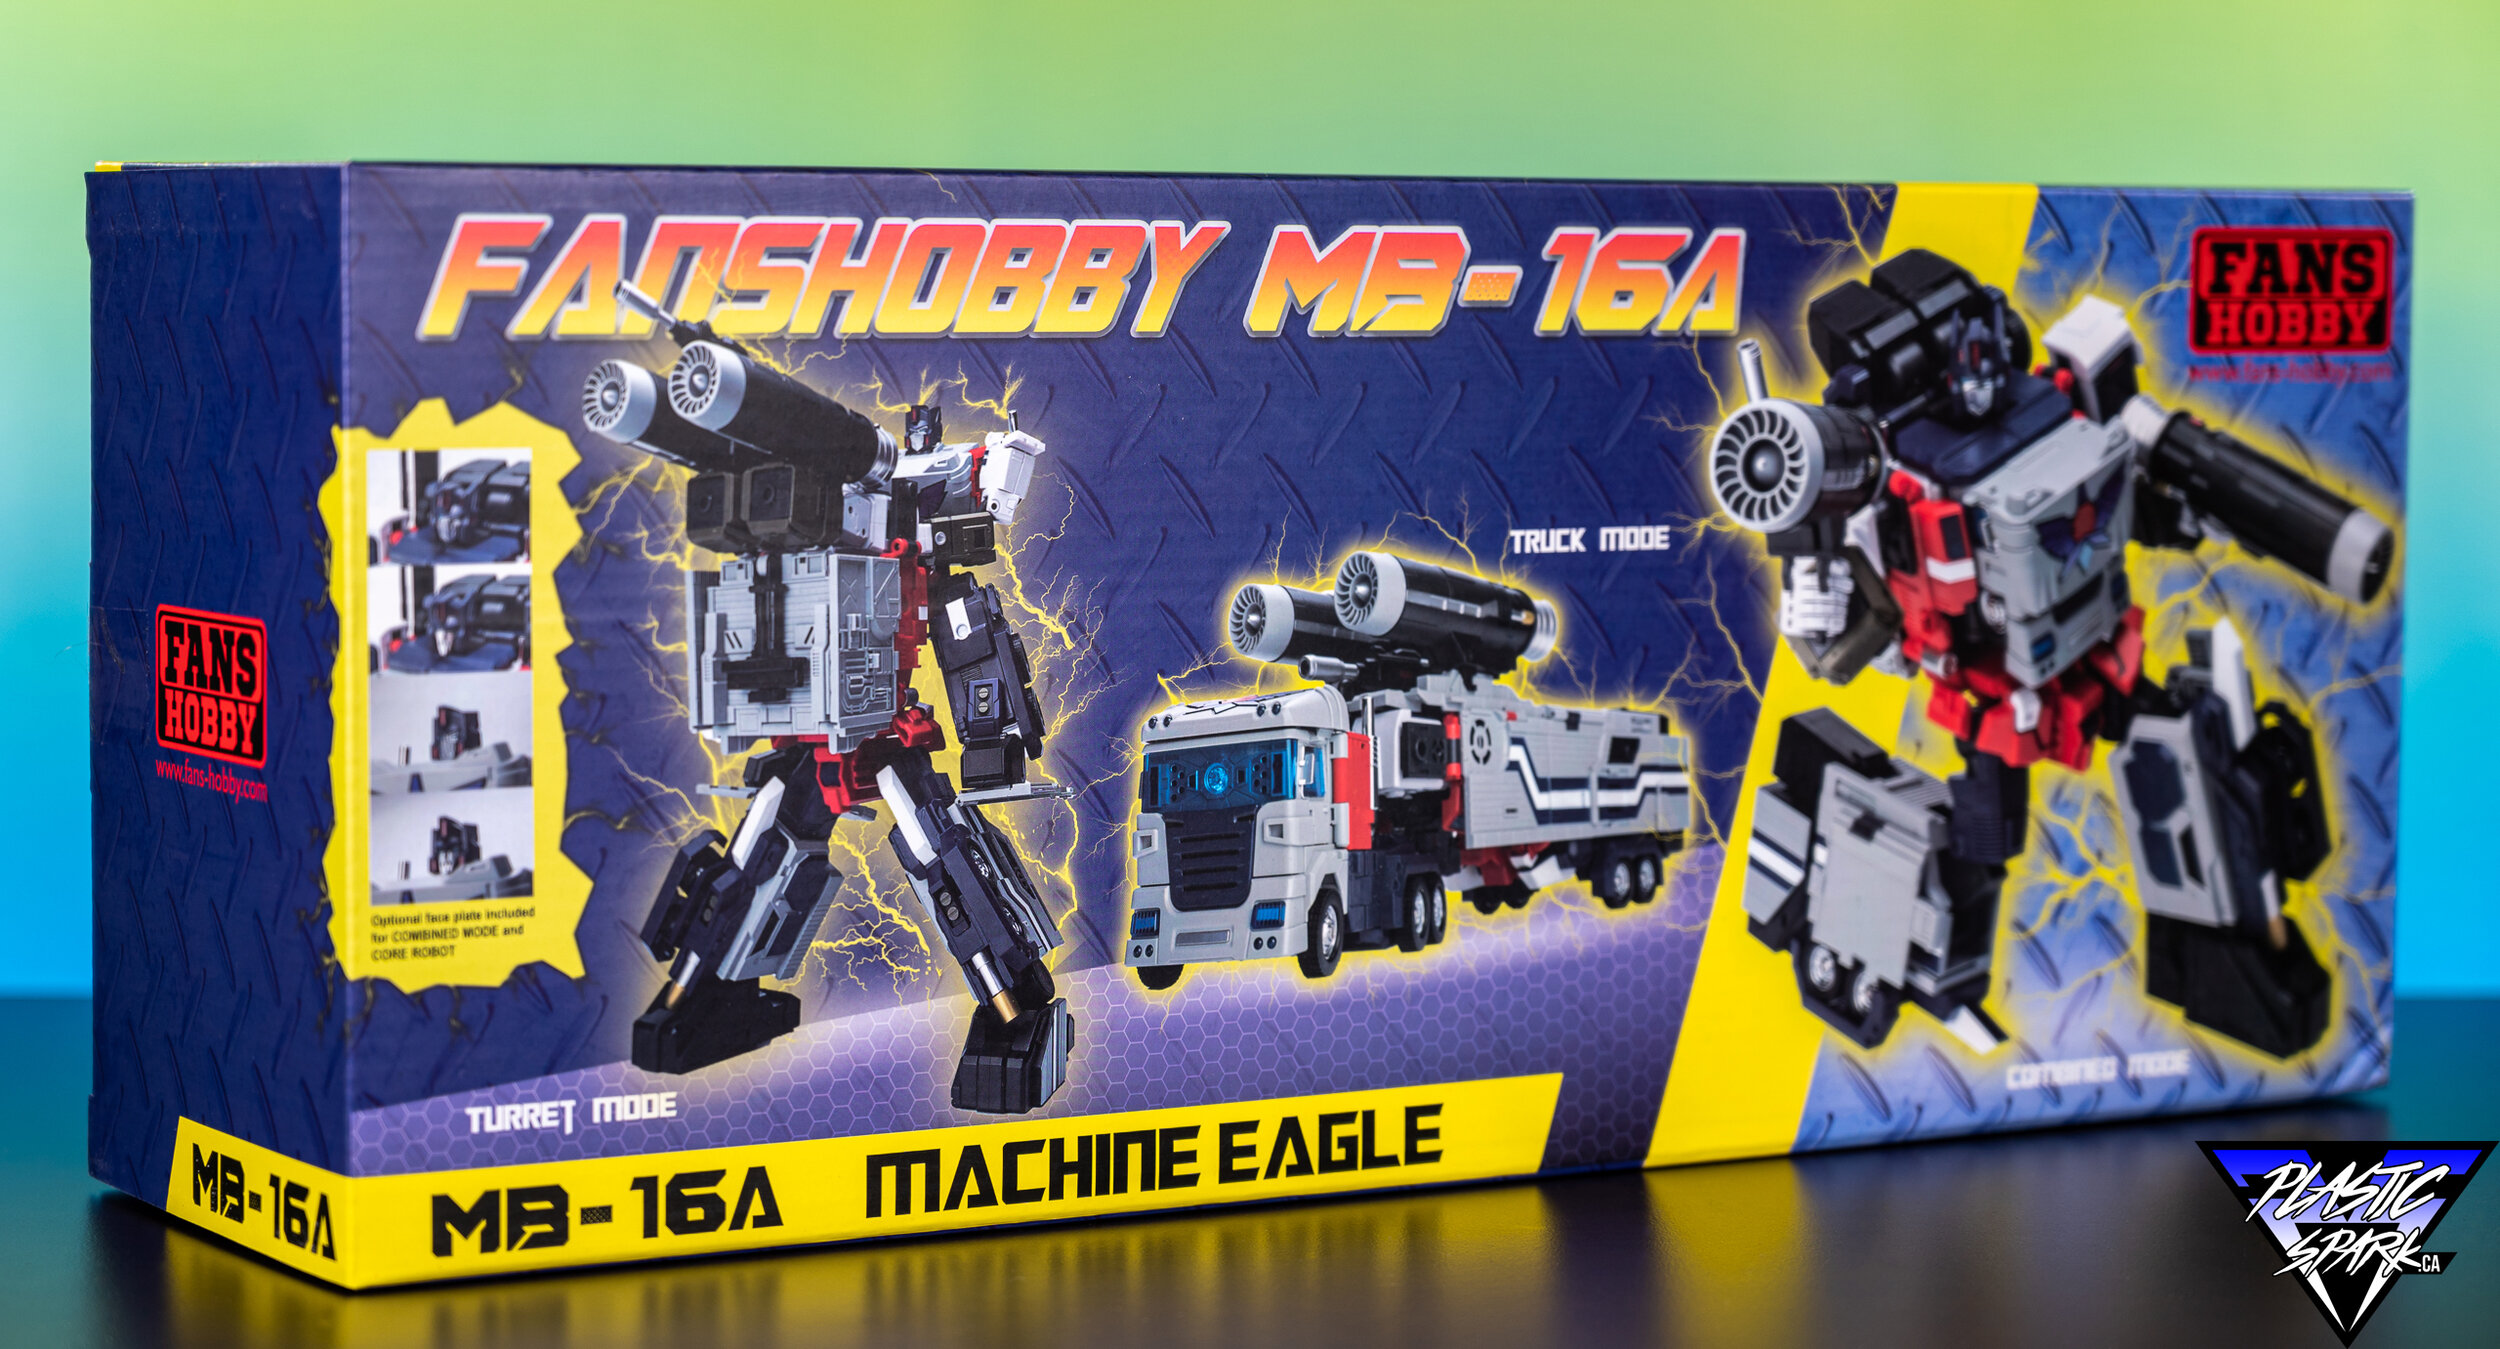 Fans Hobby MB-16A Machine Eagle (46 of 46).jpg